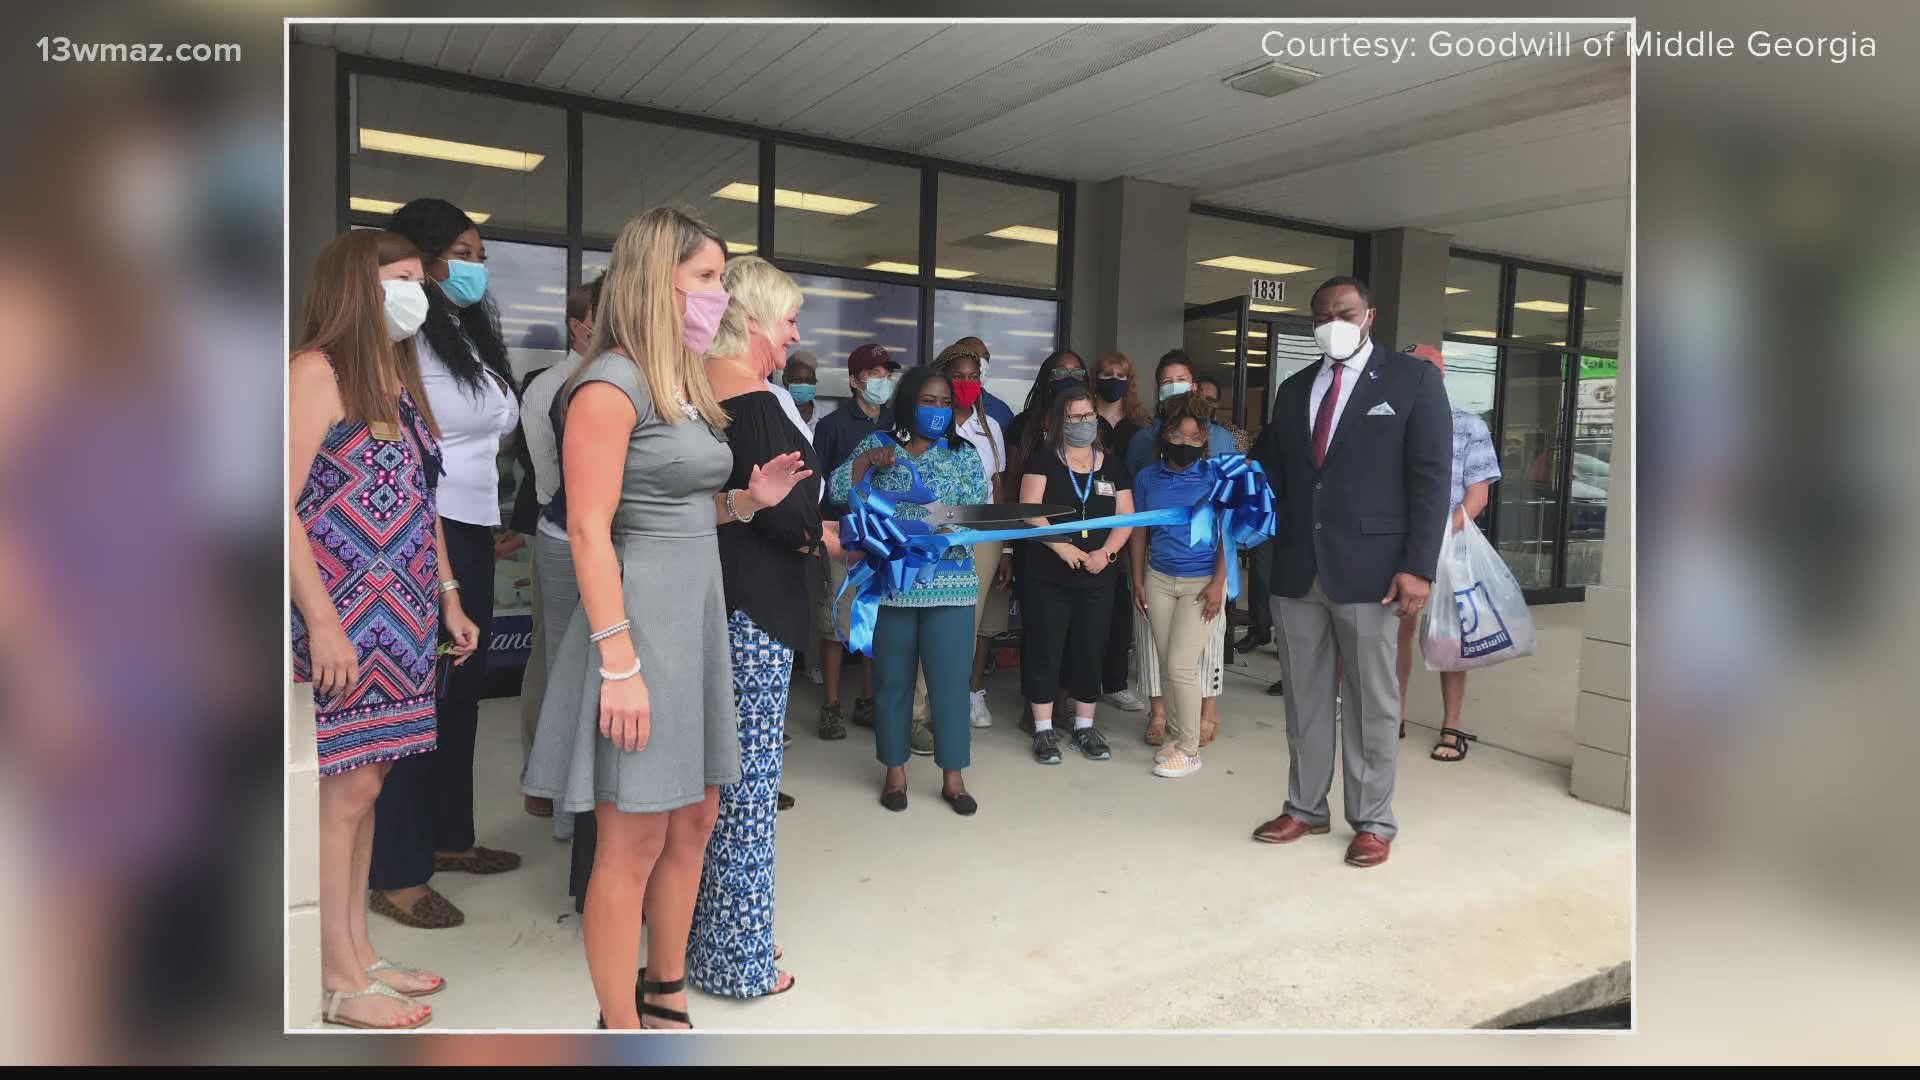 The store's grand opening and ribbon cutting ceremony was originally planned for May but had to be postponed due to the pandemic.